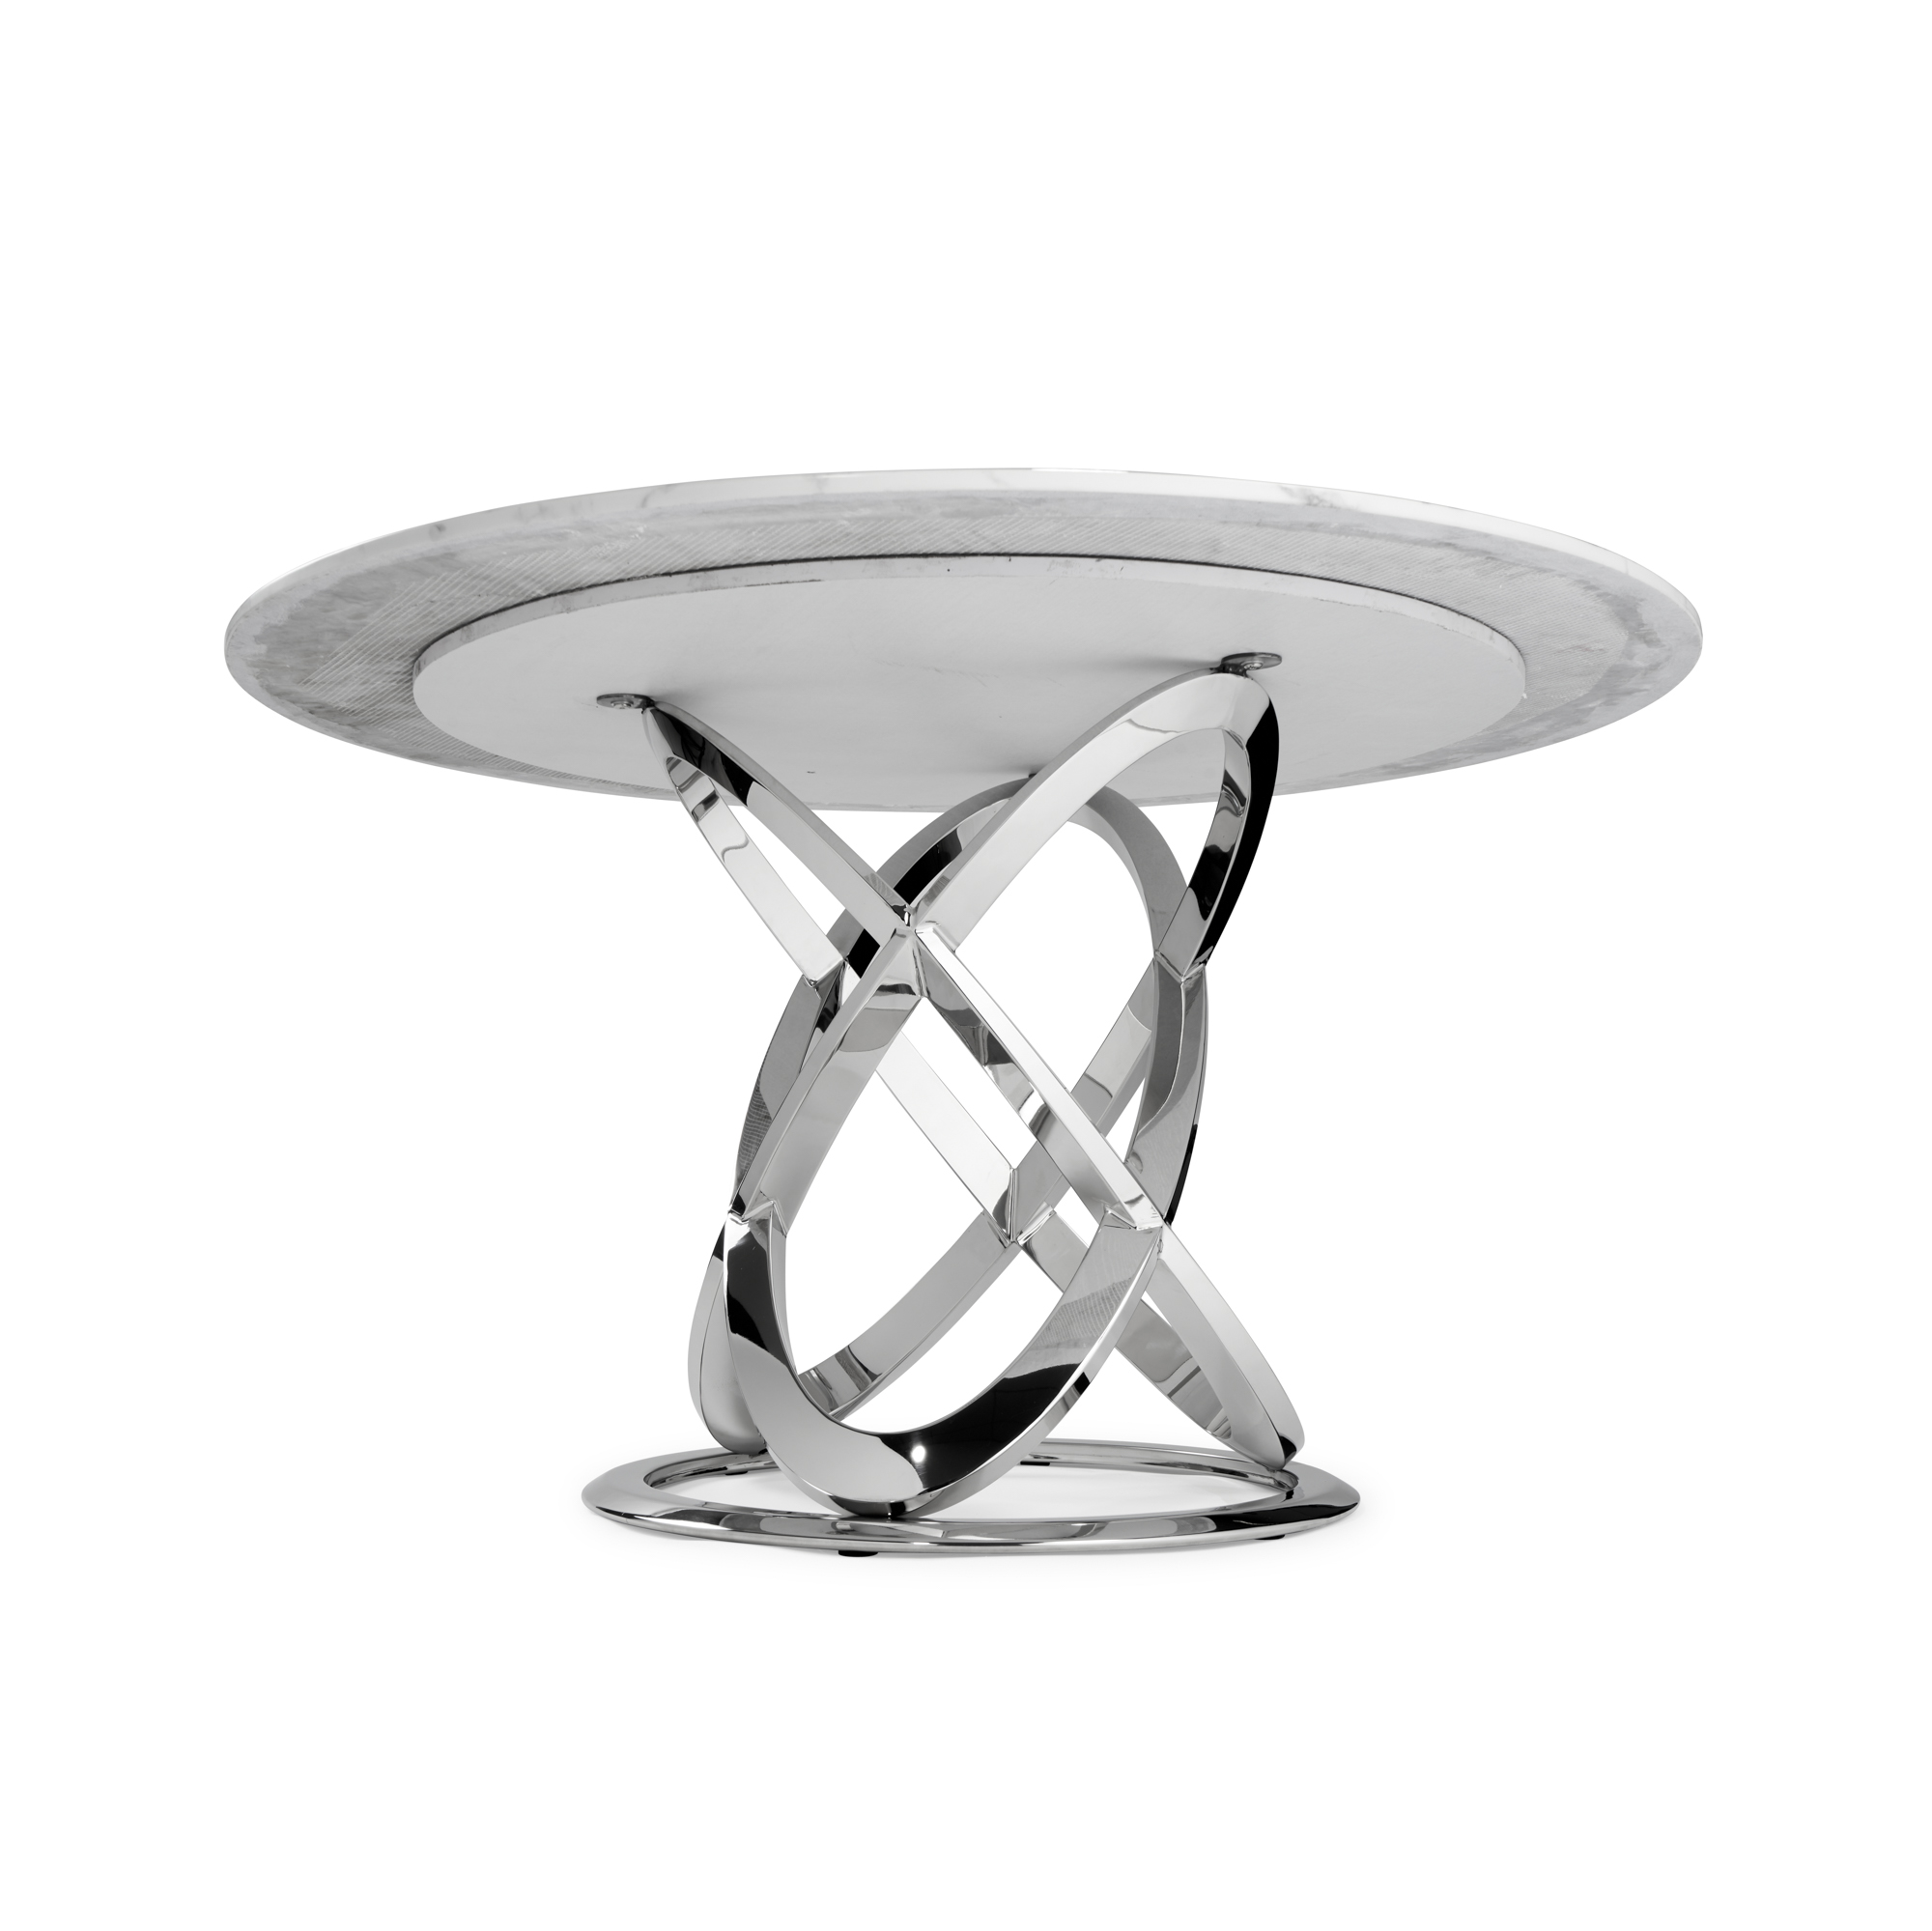 1.3M Pedestal Polished Circular Stainless Steel Dining Table with White Marble Effect